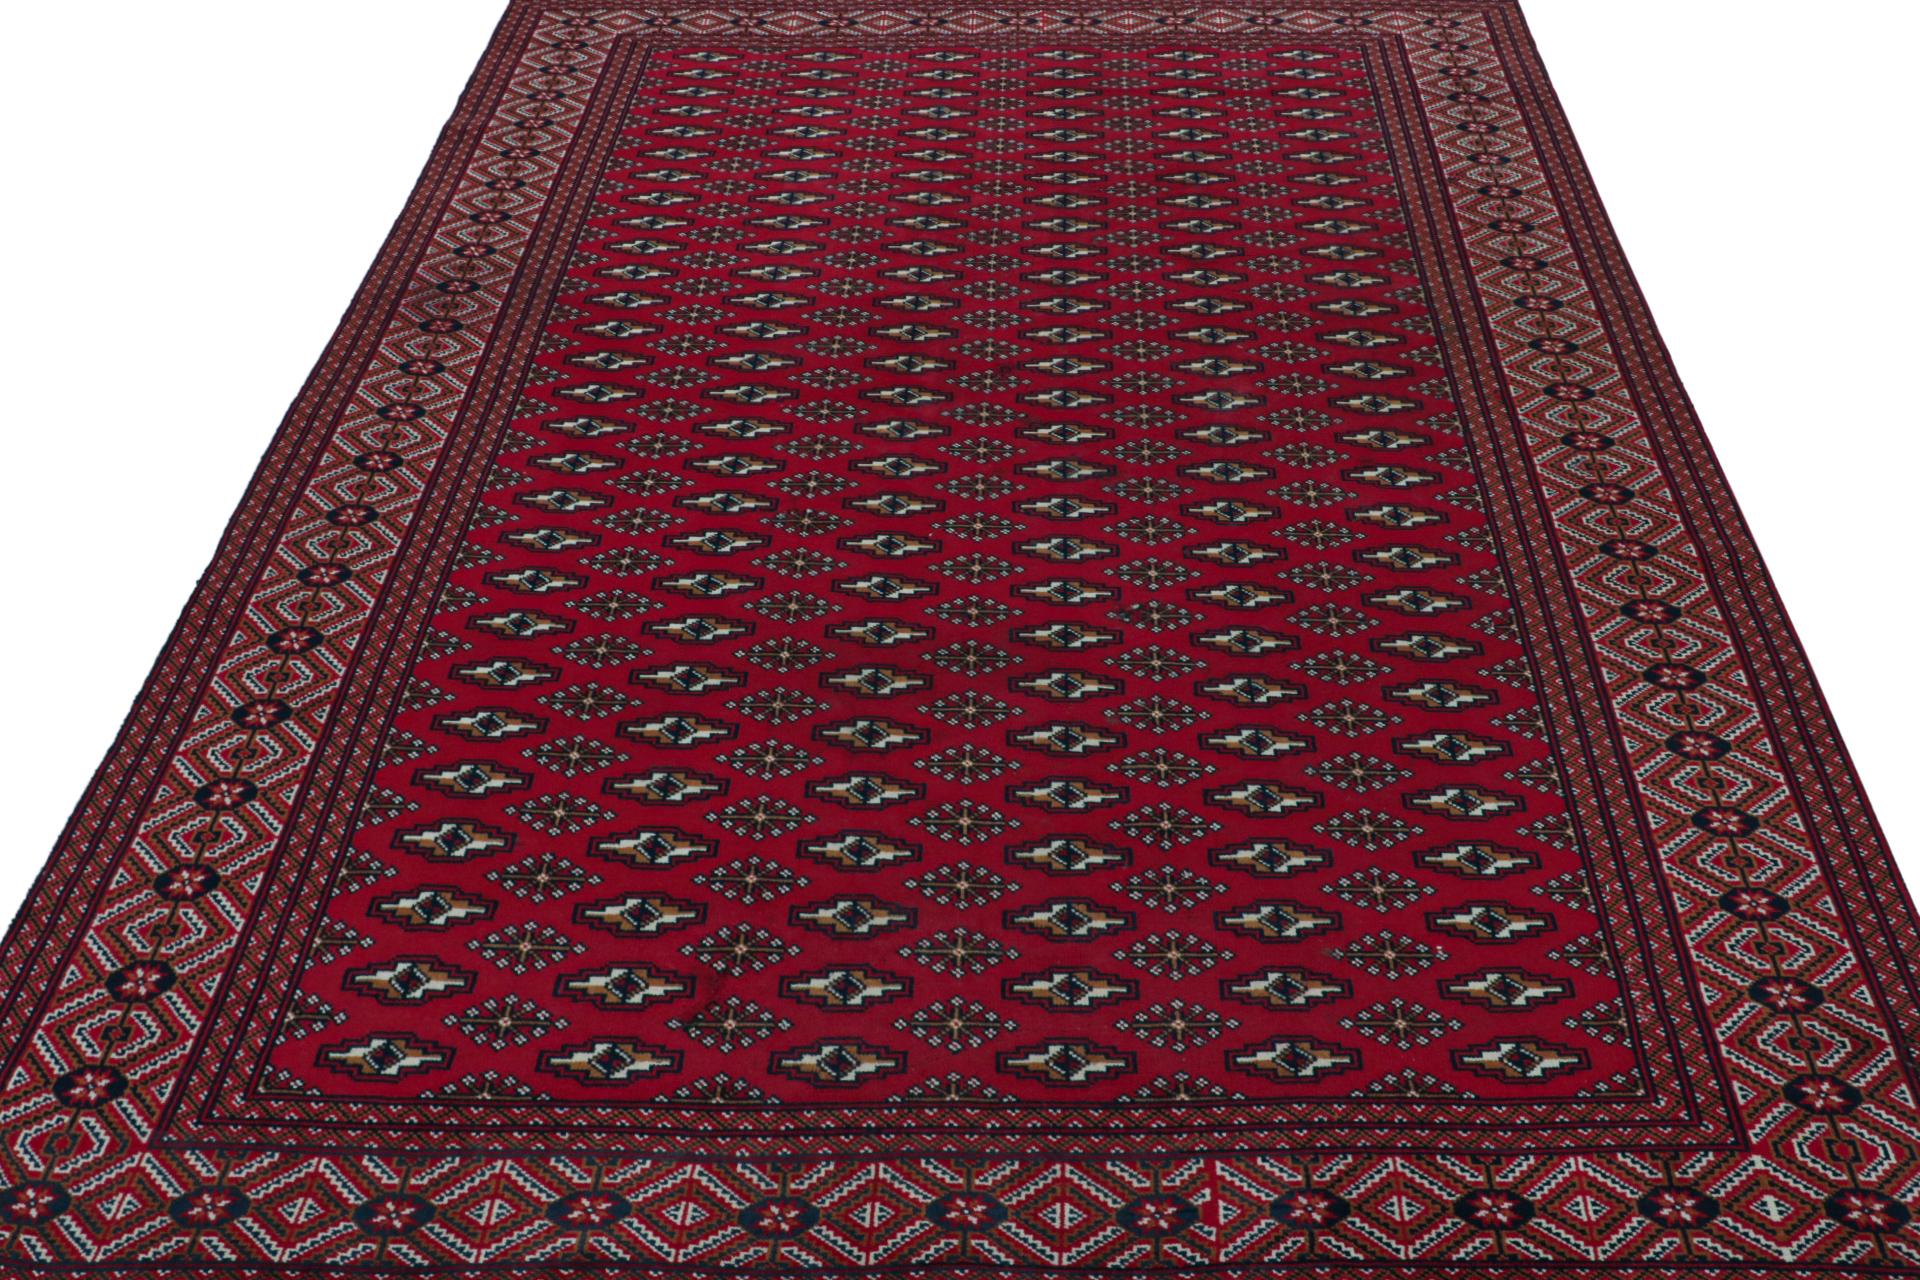 Hand-Knotted Vintage Persian rug in Red with Beige-Brown Geometric Patterns by Rug & Kilim For Sale